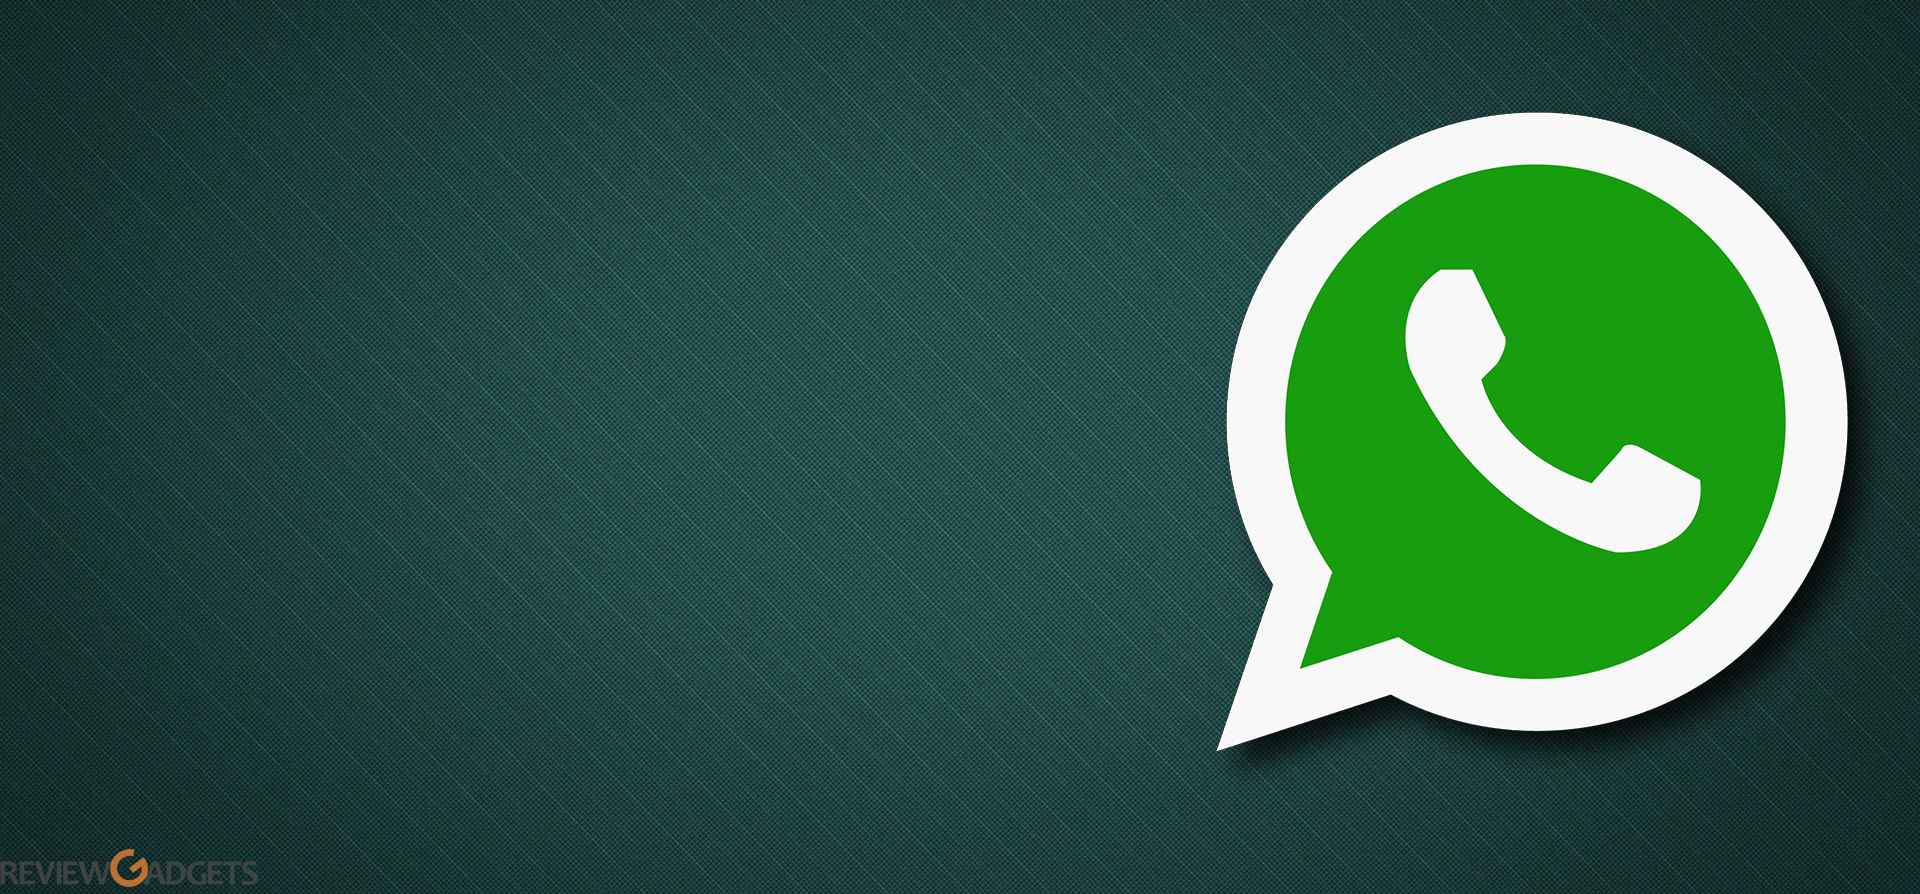 Send messages with quotes soon on WhatsApp